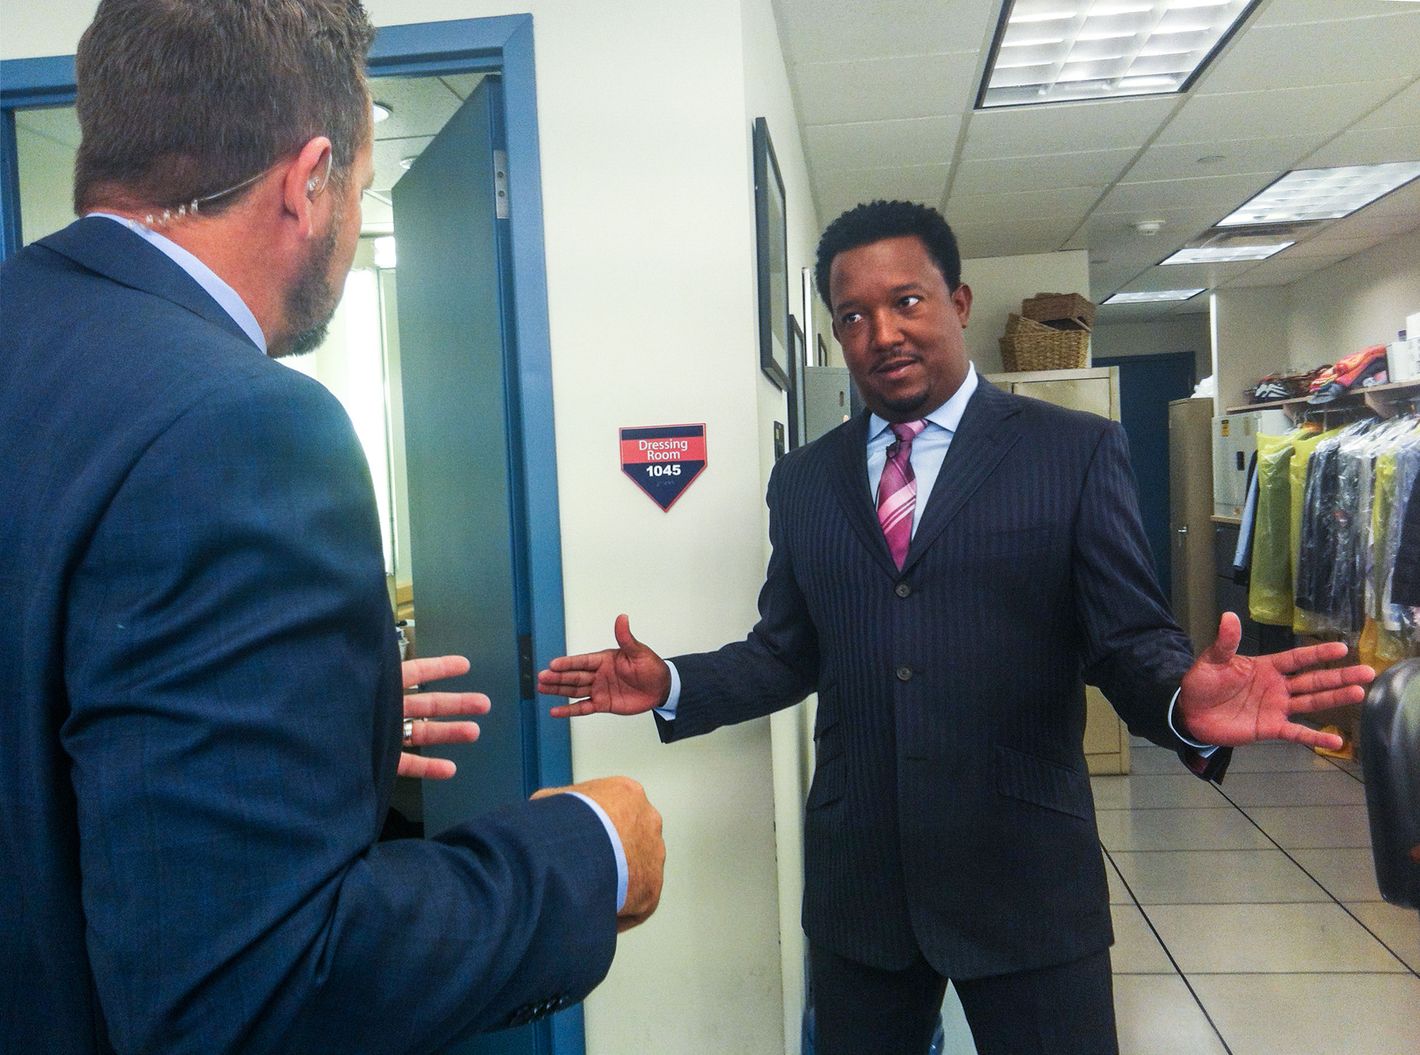 A conversation with Pedro Martinez, covering his career and more